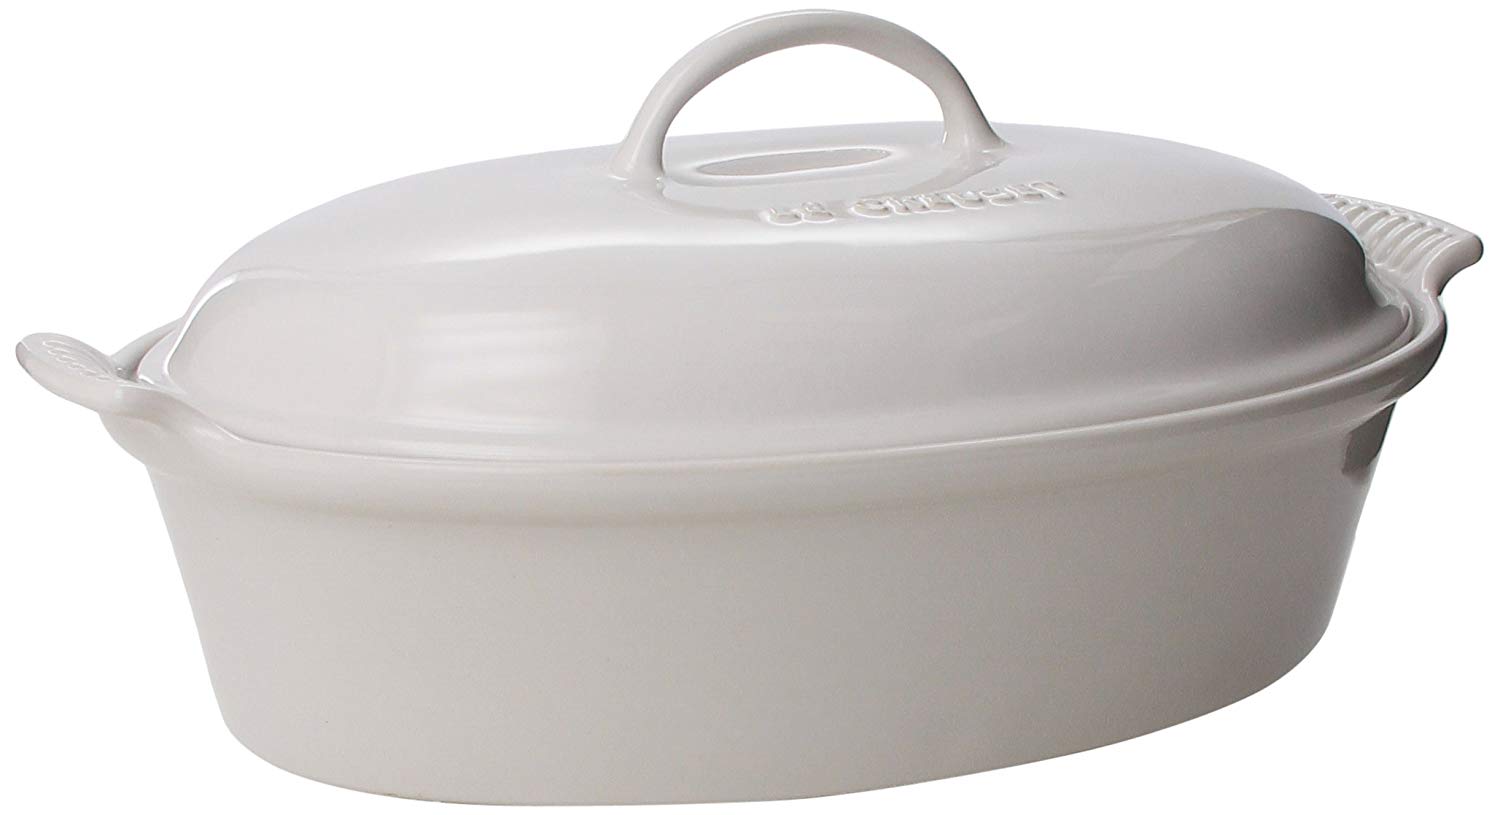 Le Creuset Heritage Covered Oval Casserole